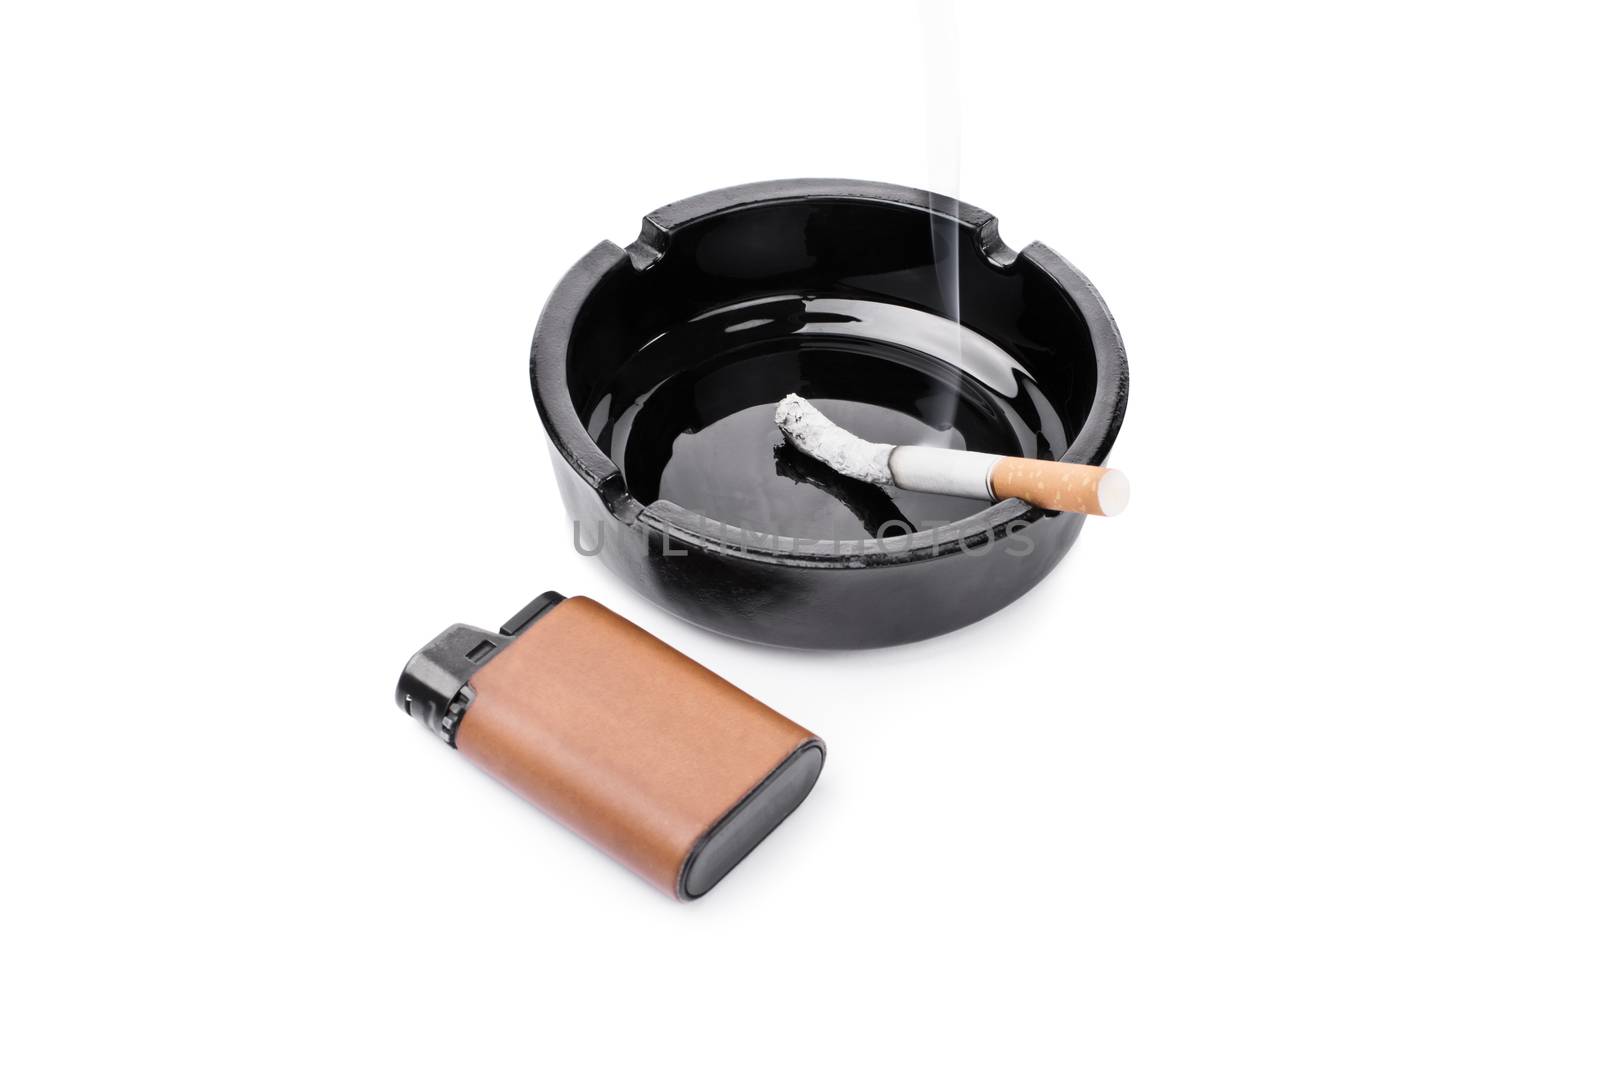 Ashtray, lighter and a smoking cigarette, isolated on white background